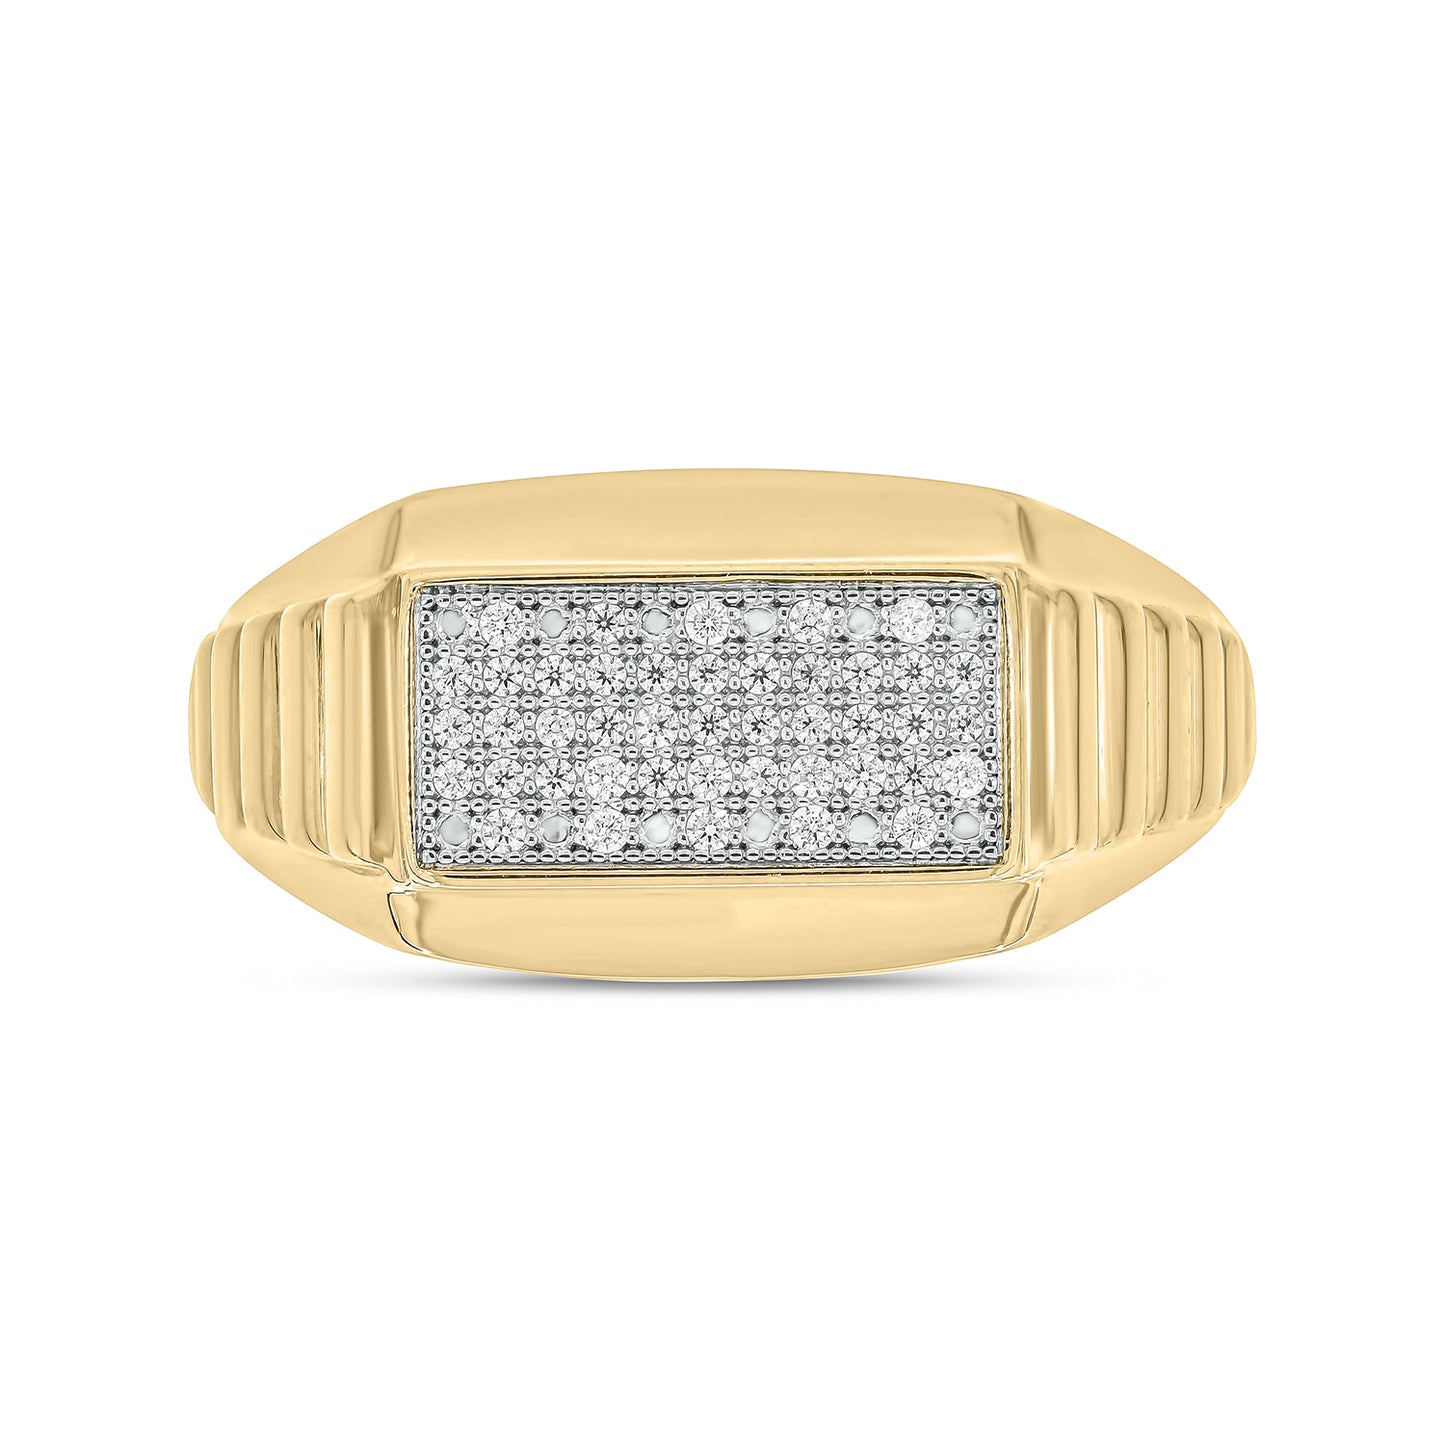 Classic Men's Ring in Gold Plated Sterling Silver